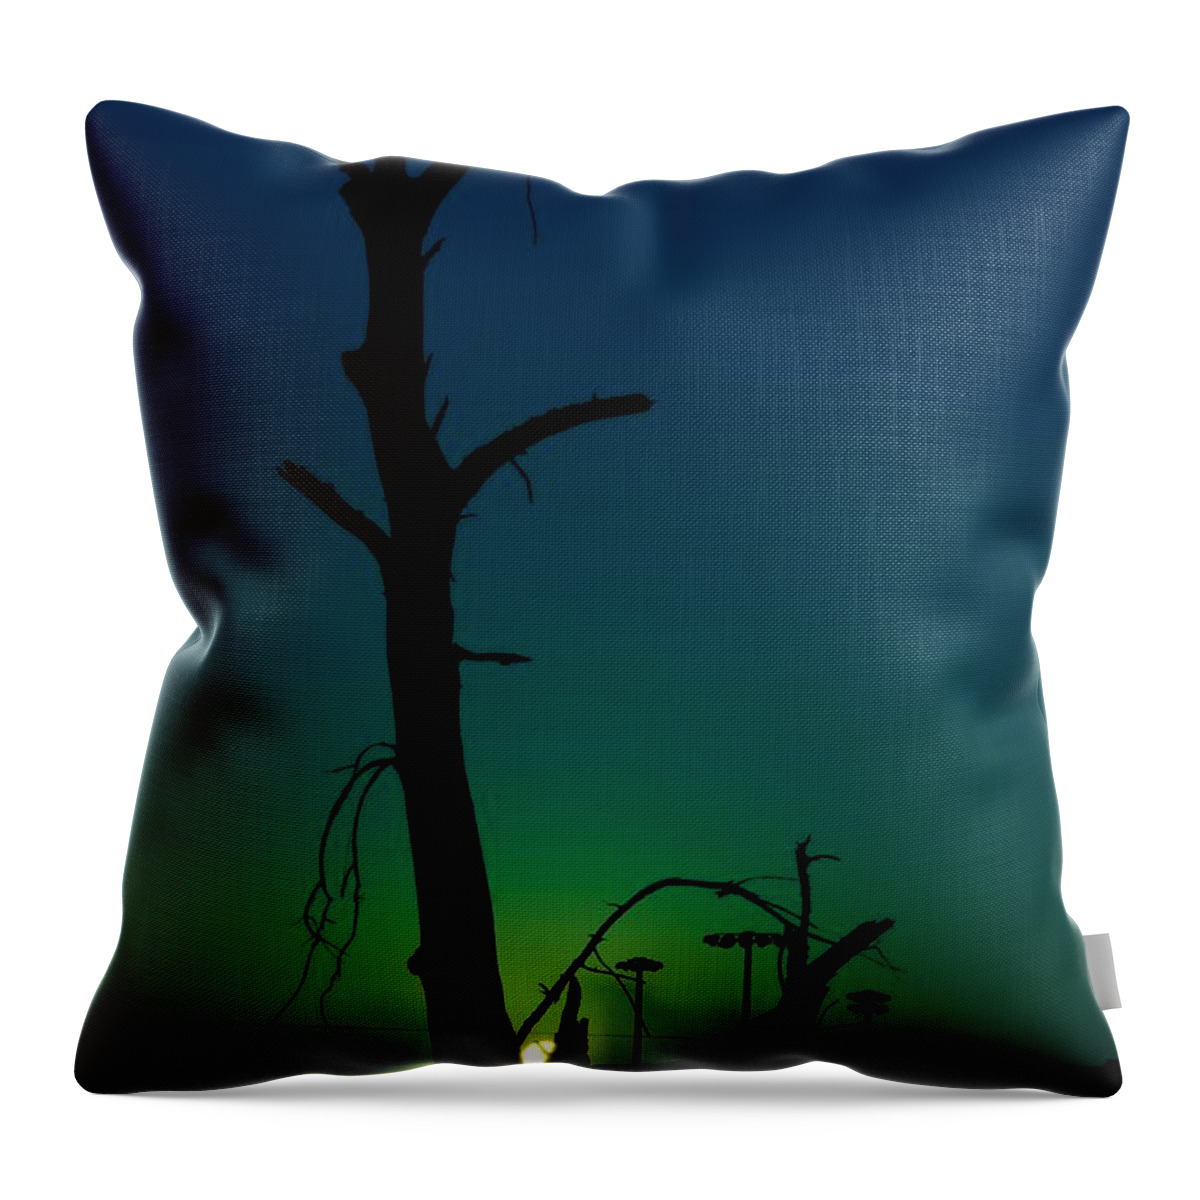 Sunrise Throw Pillow featuring the photograph Sunrise 1 by Chris Schroeder